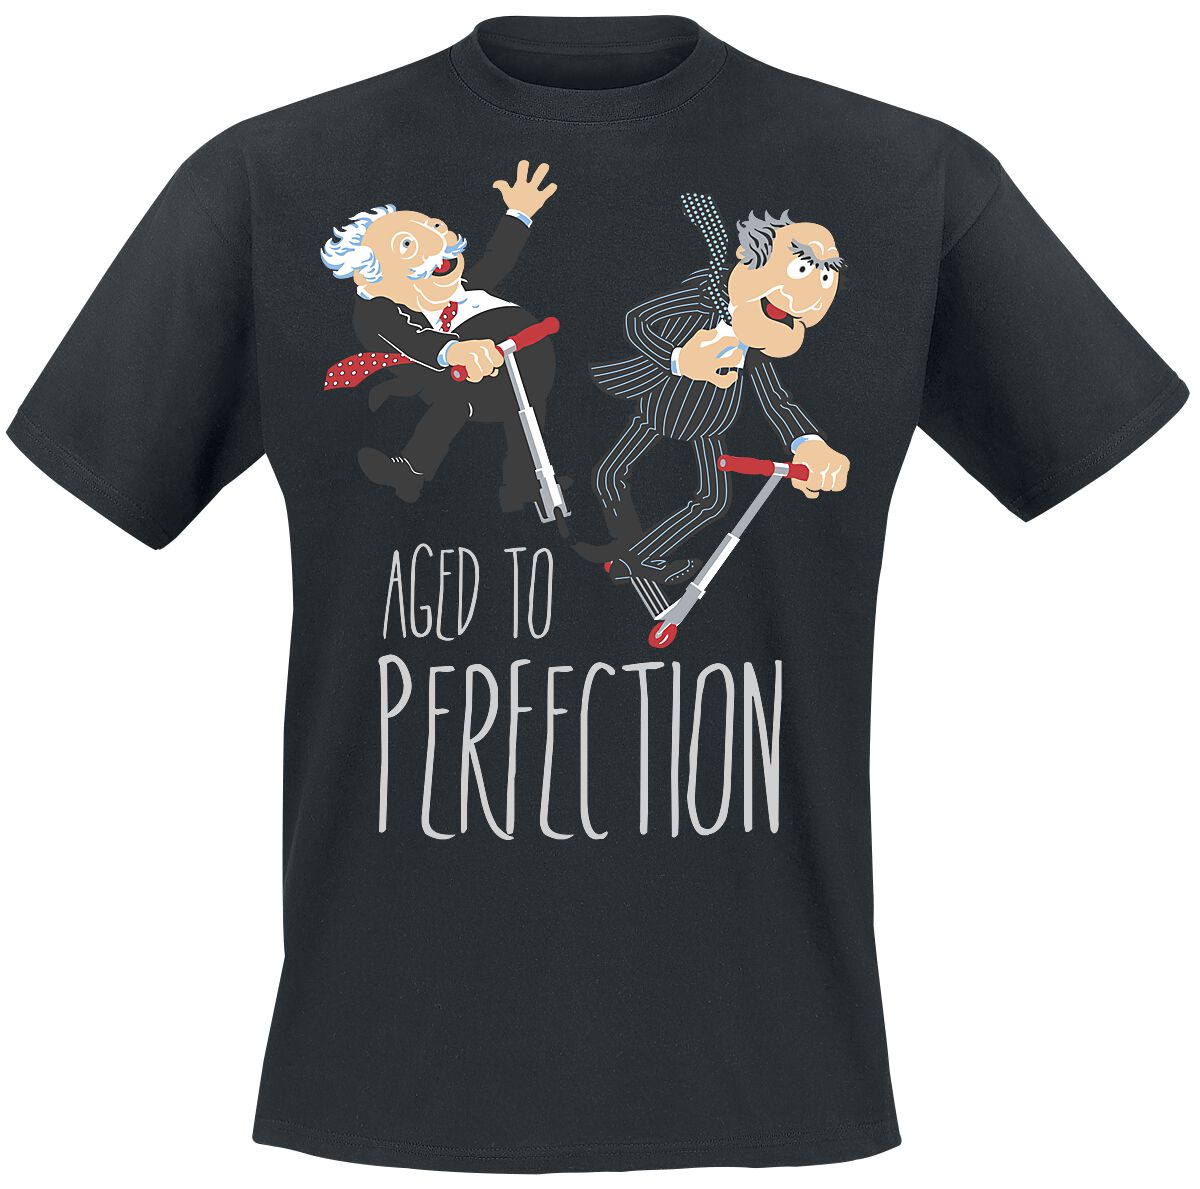 The Muppets Aged To Perfection T-Shirt black